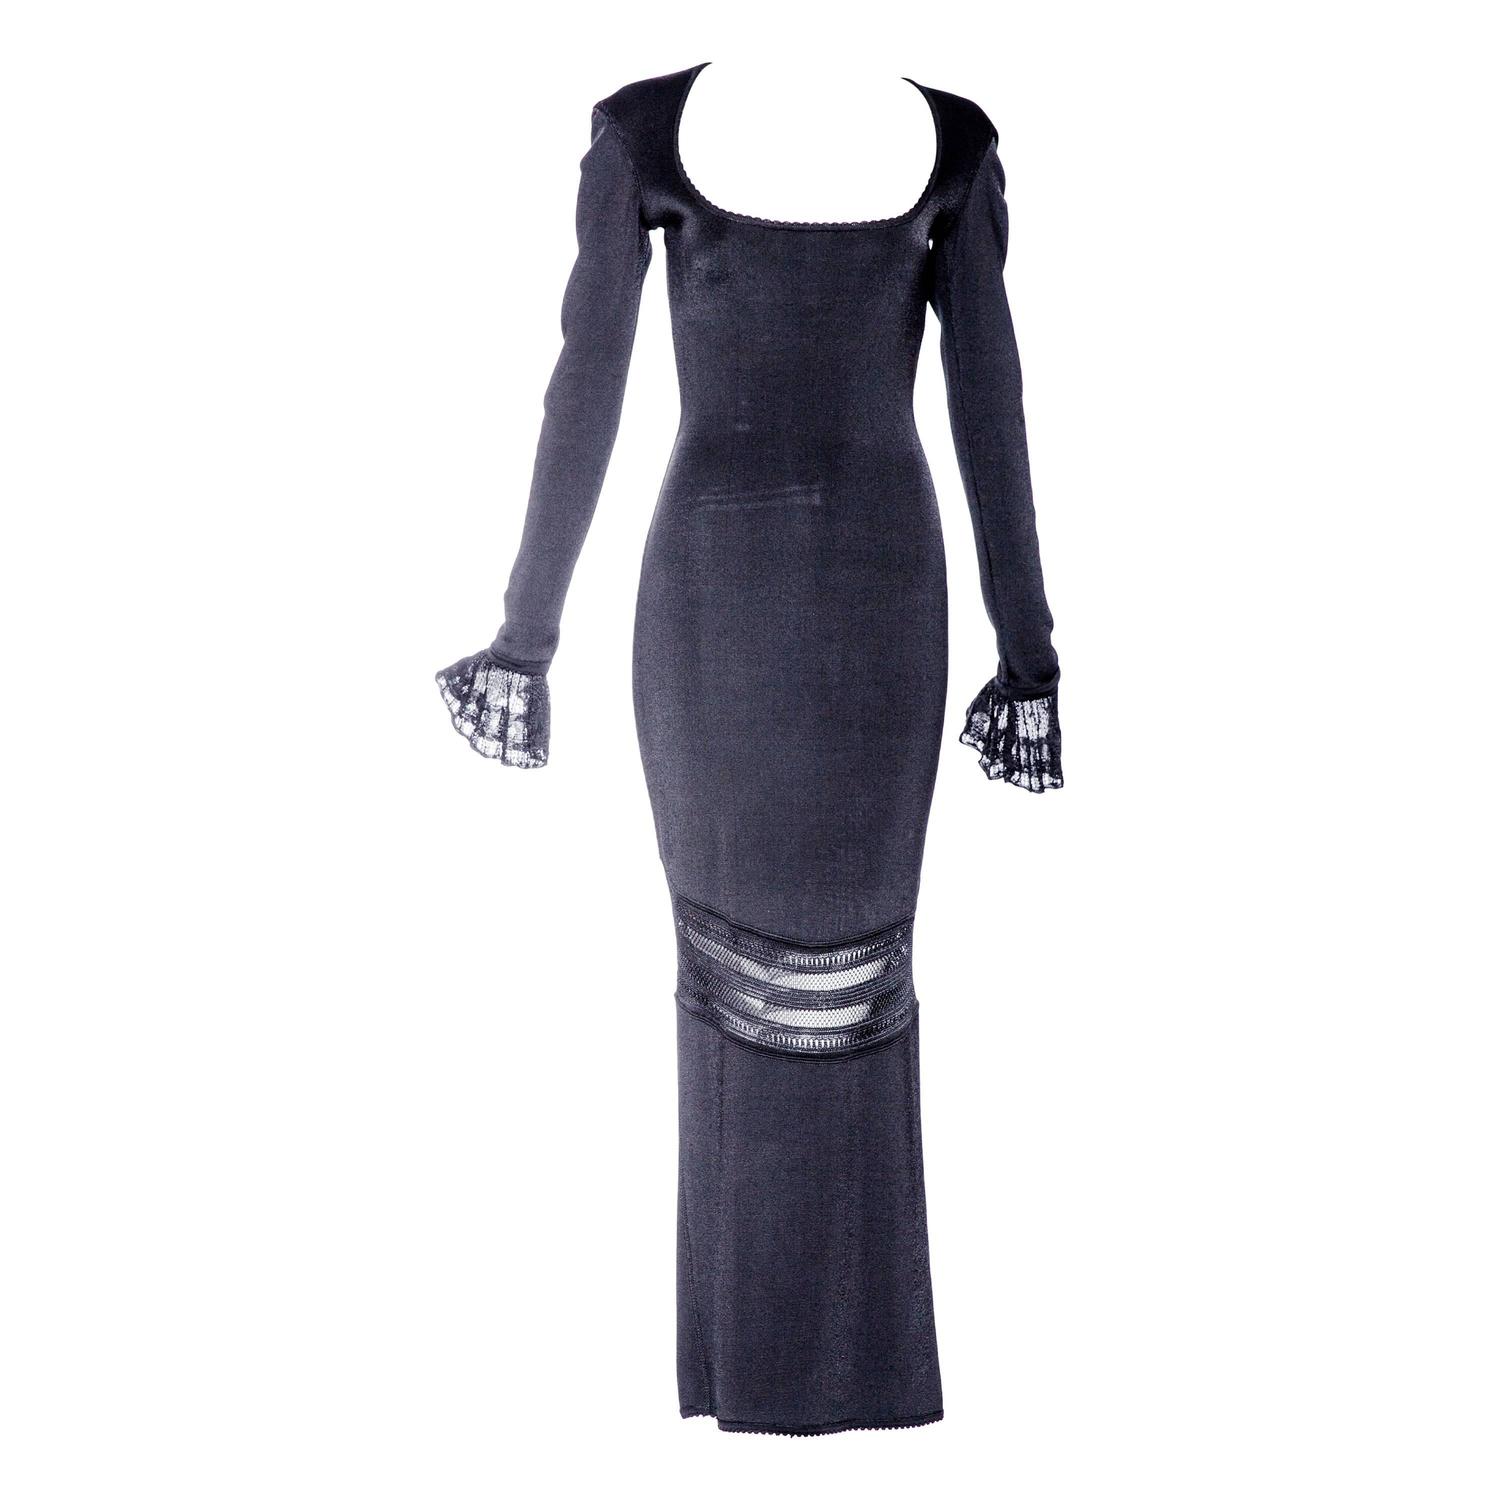 ALAIA black knit long sleeve dress For Sale at 1stdibs